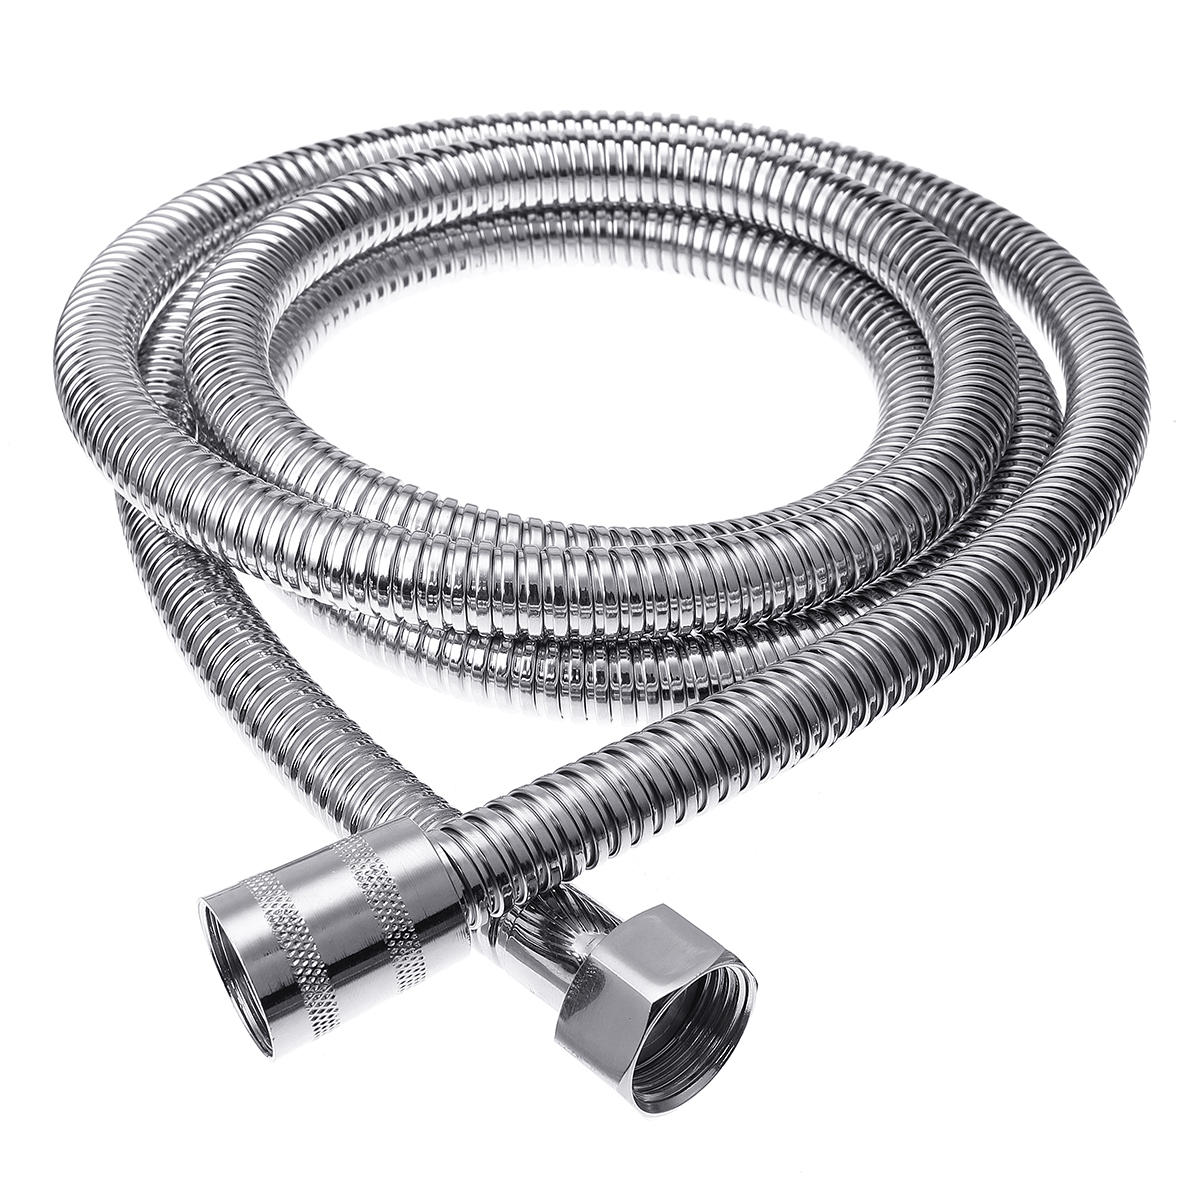 2M Extra Long Replacement Shower Hose Anti-Kink Adjustable Shower Pipe Steel 